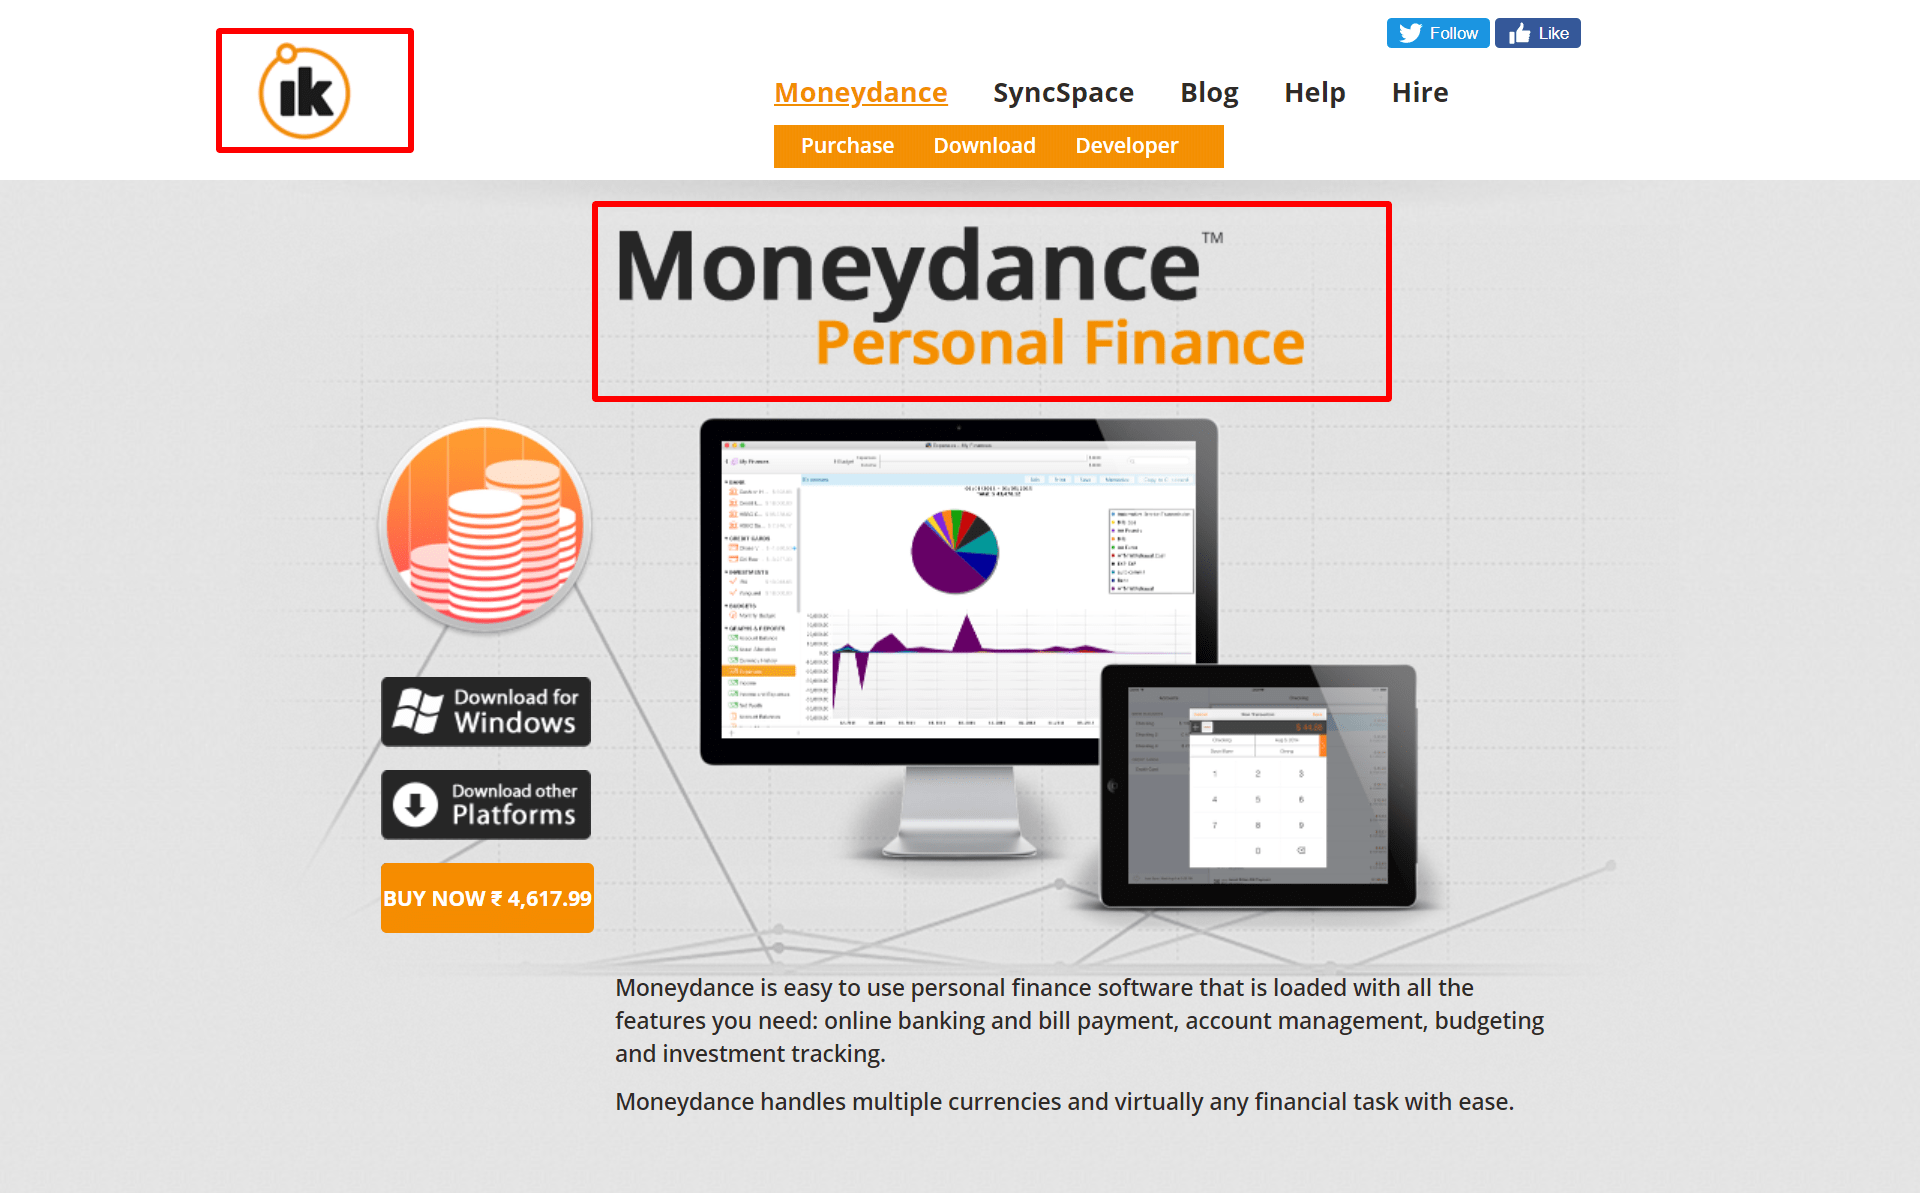 Moneydance-Personal-Finance-Manager-for-Mac-Windows-and-Linux-Infinite-Kind